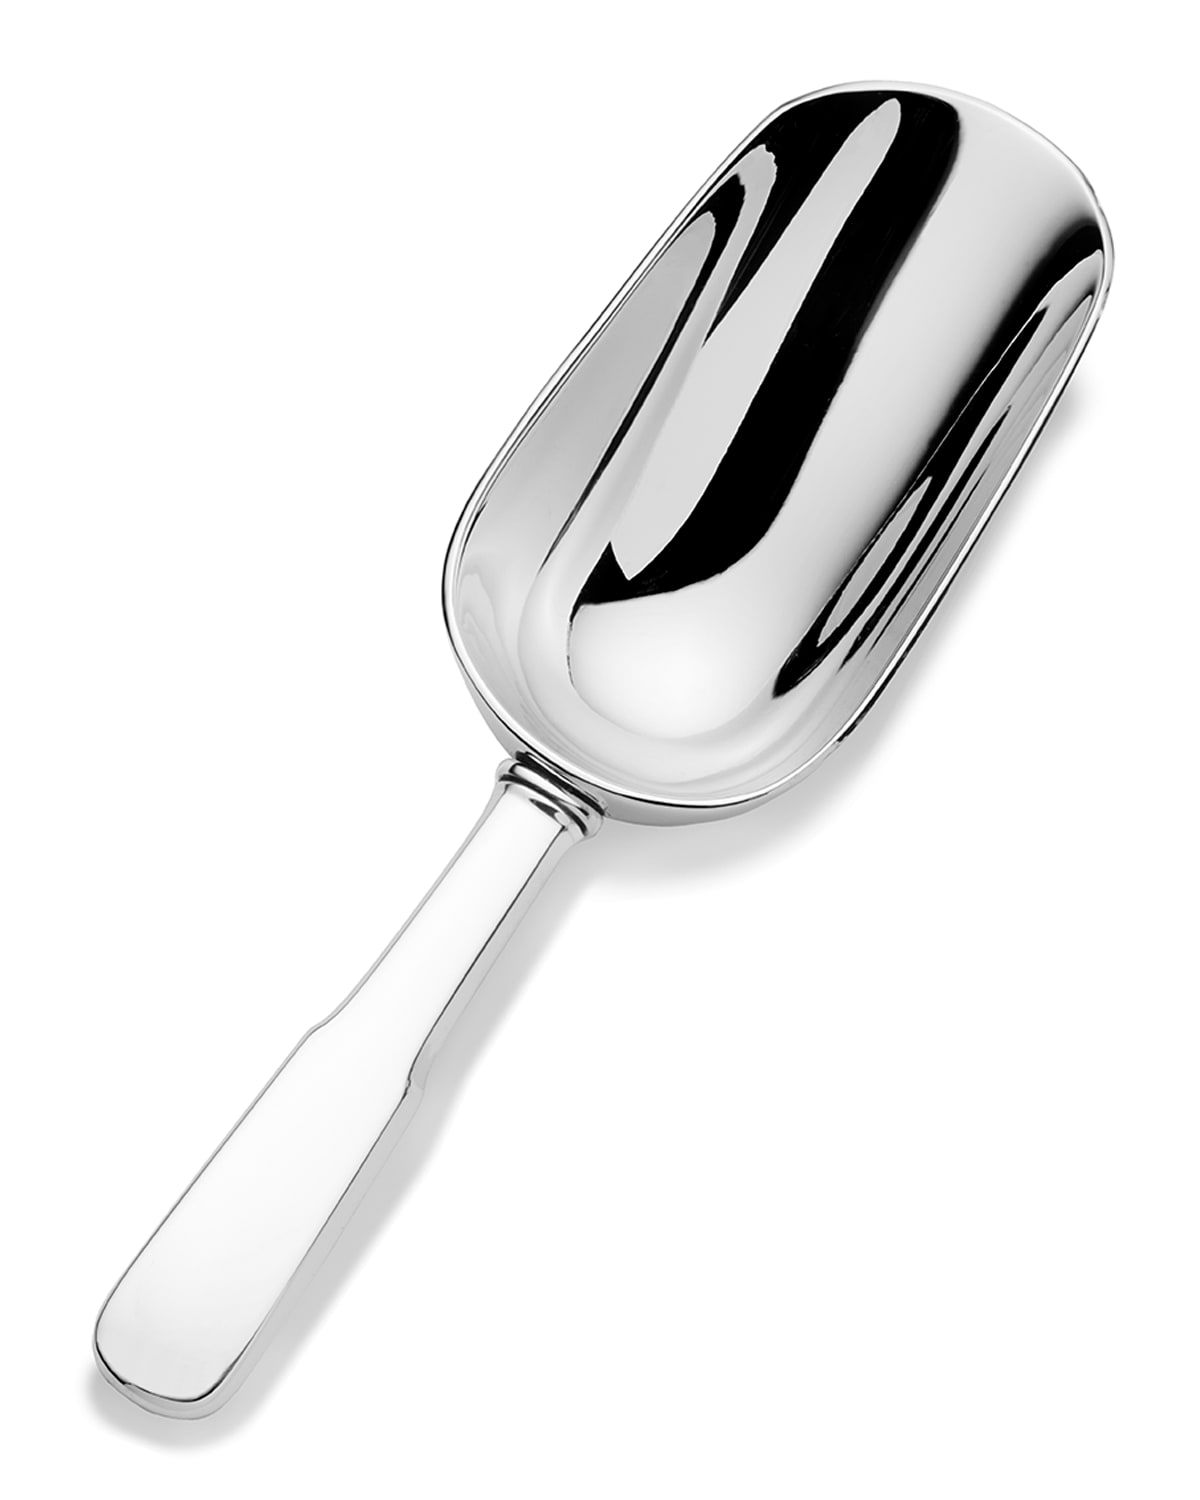 Shop Empire Silver Sterling Colonial Ice Scoop In Silver